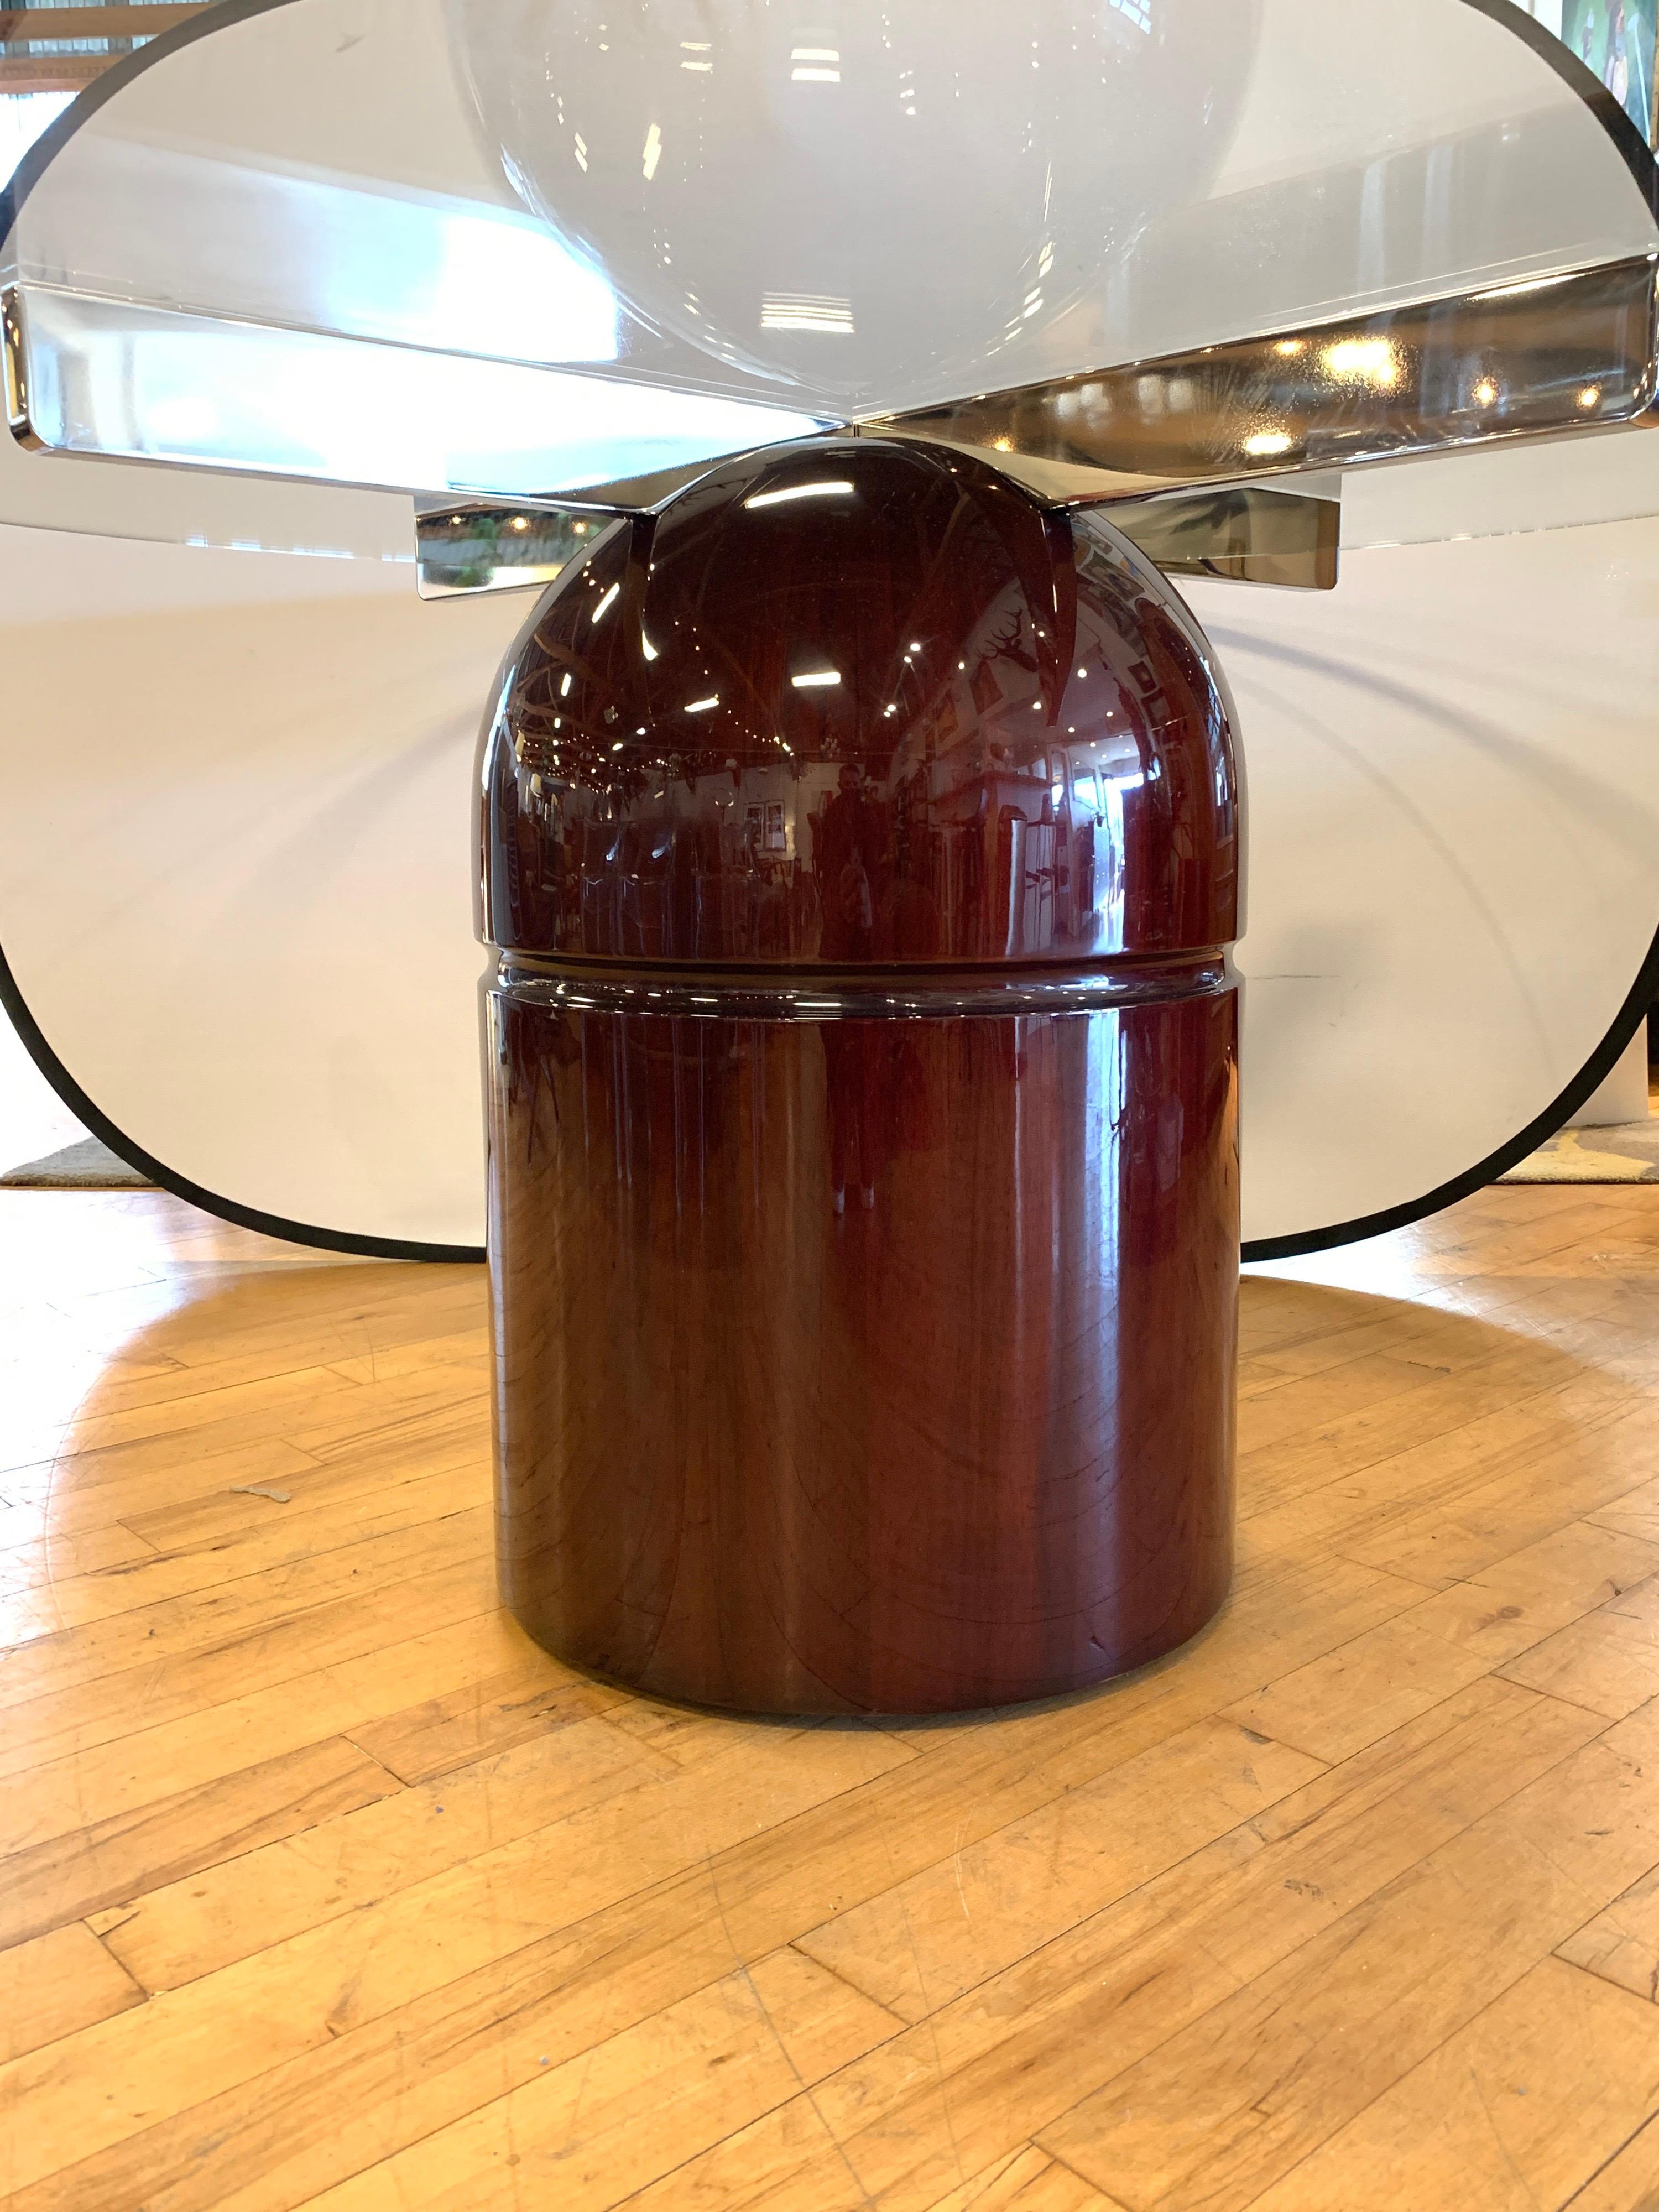 Rare custom piece seldom seen in mirror lacquer finish. Oxblood with the faintest wood grain undertone. Truly gorgeous treatment. This is an ultra rare treatment clad in mahogany and a heavy mirror laquer finish. 